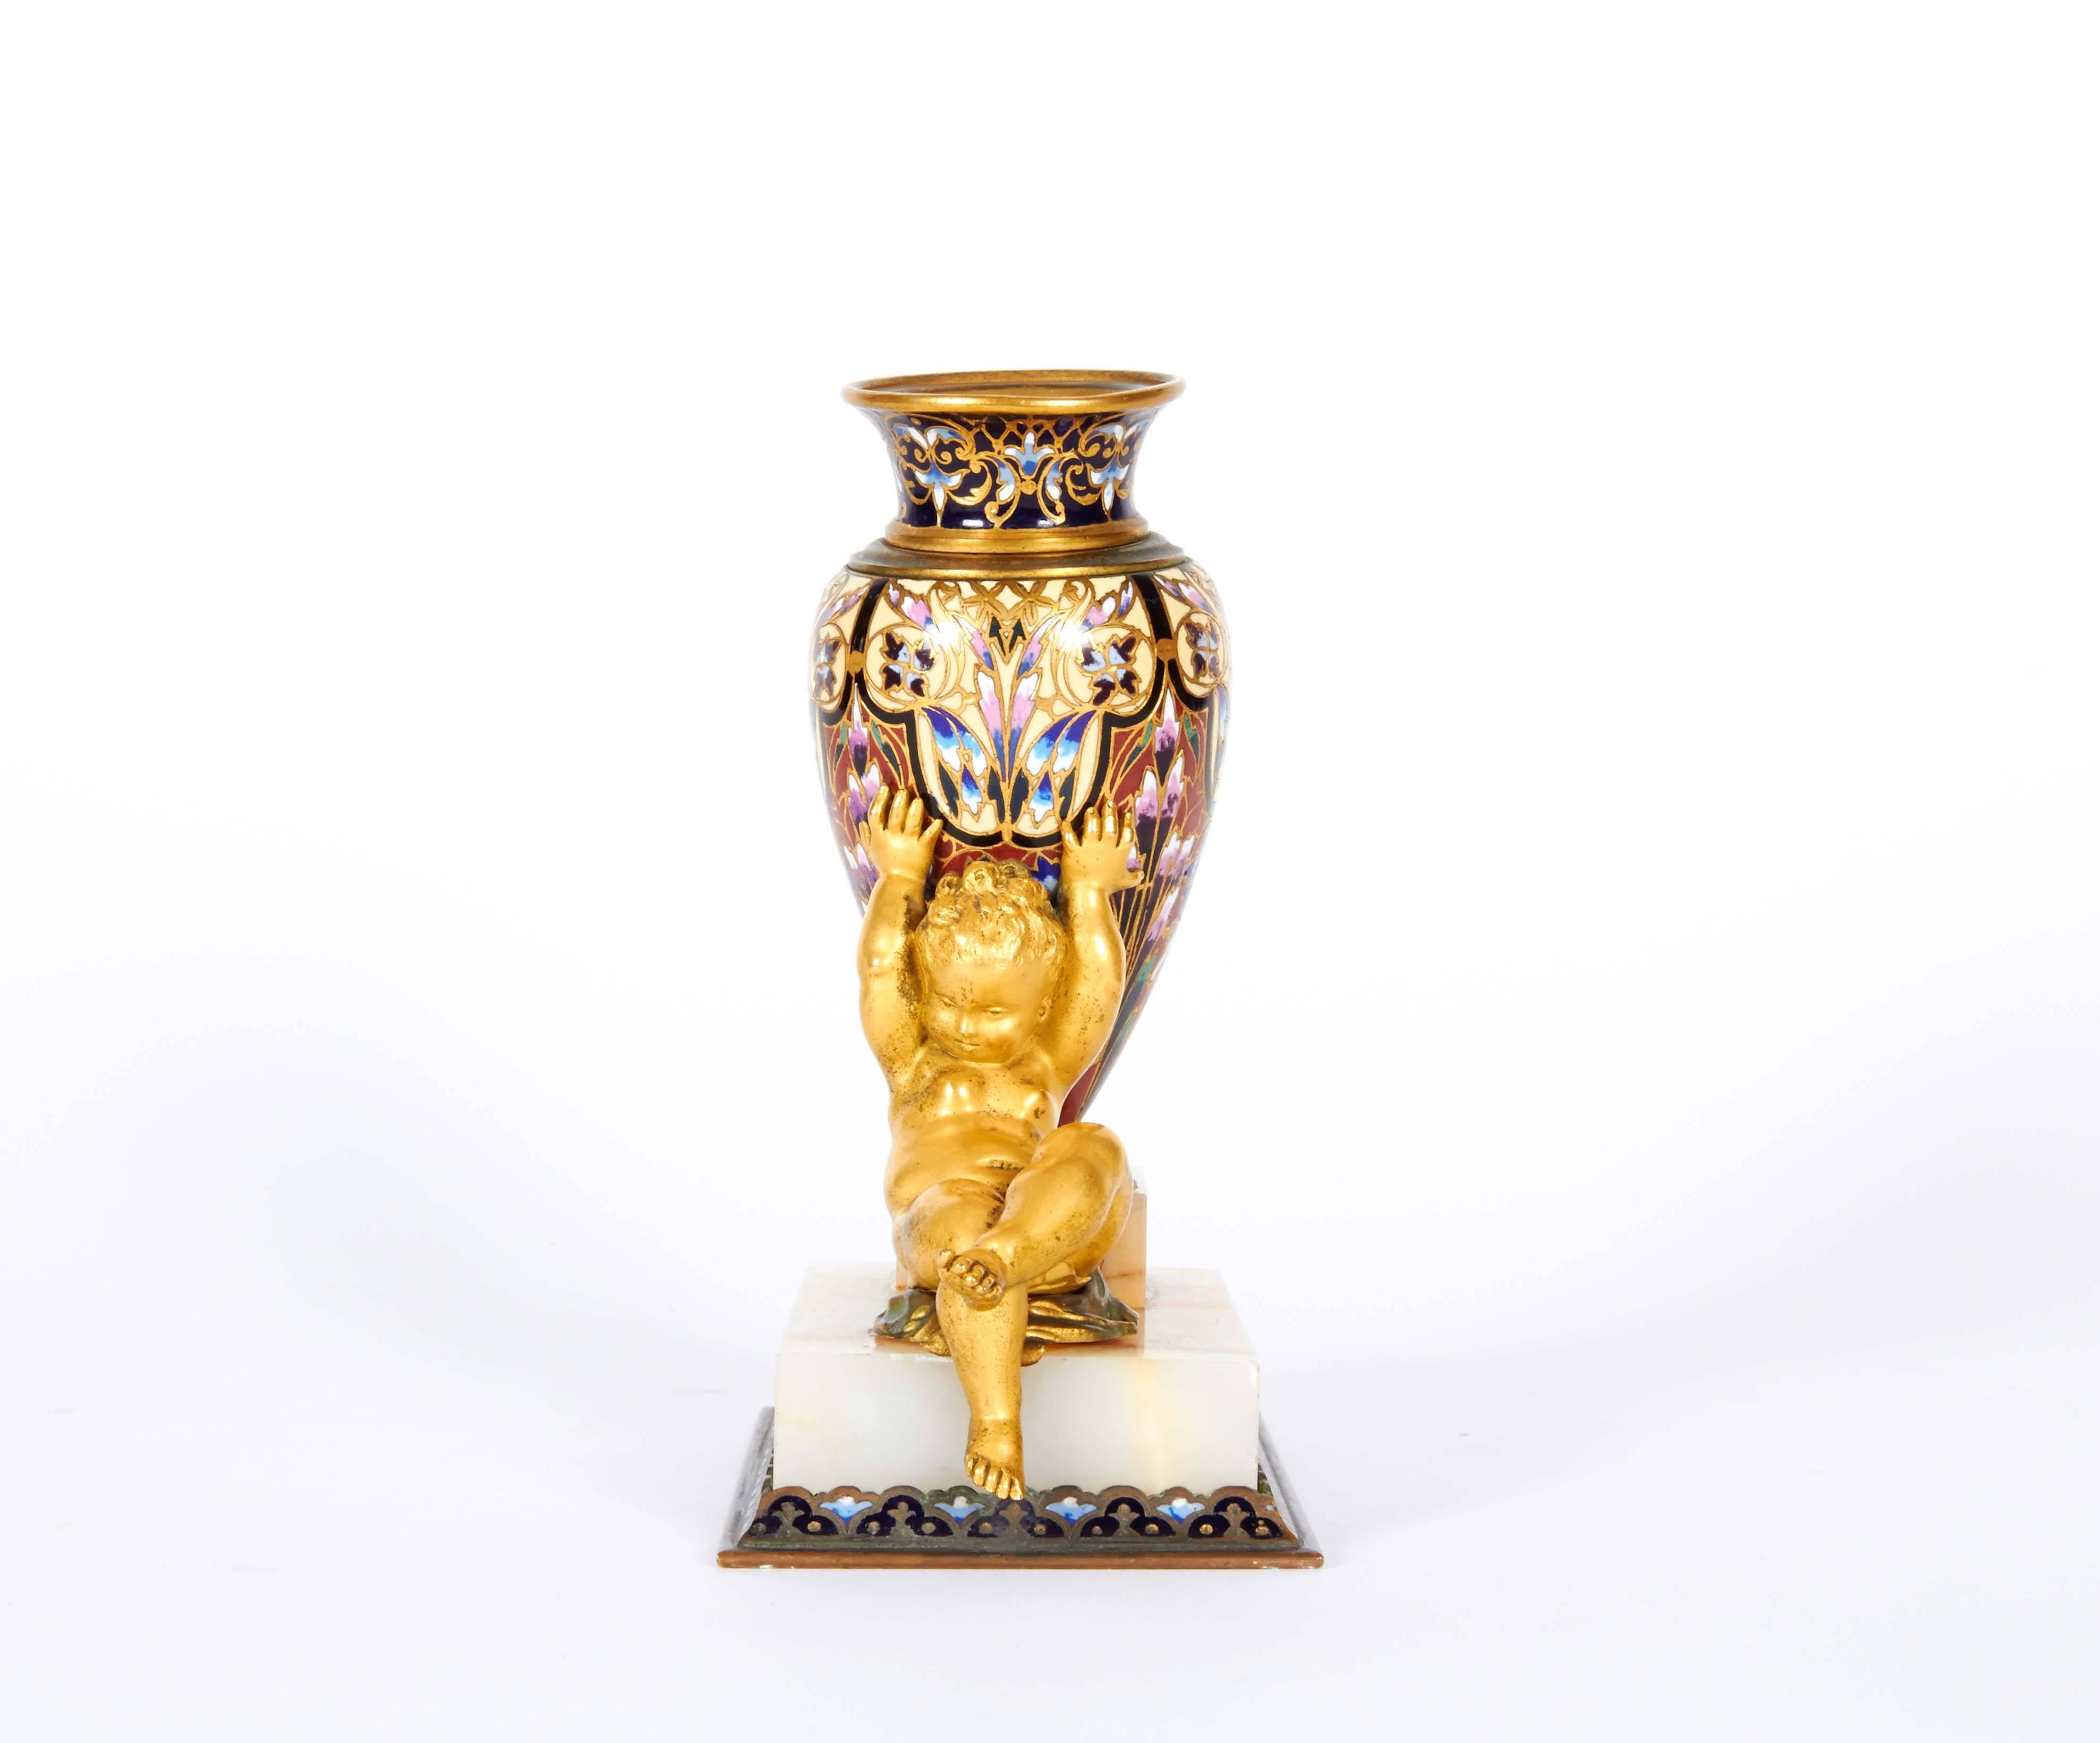 French ormolu onyx and Champlevé/Cloisonné enamel bud vase with a seated cherub/putti holding the vase.